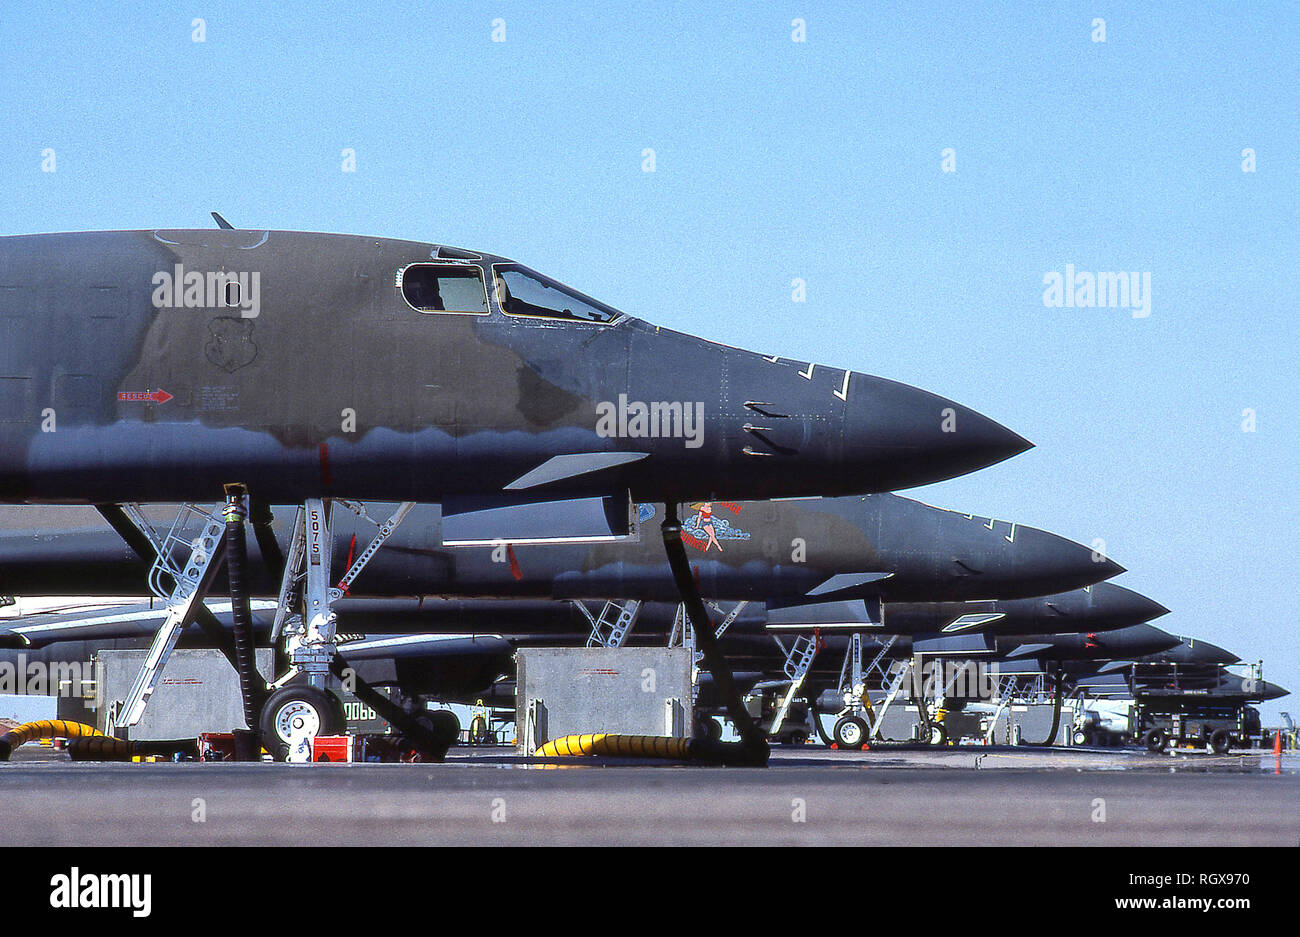 United States Air Force B1-B Supersonic bomber. Stock Photo